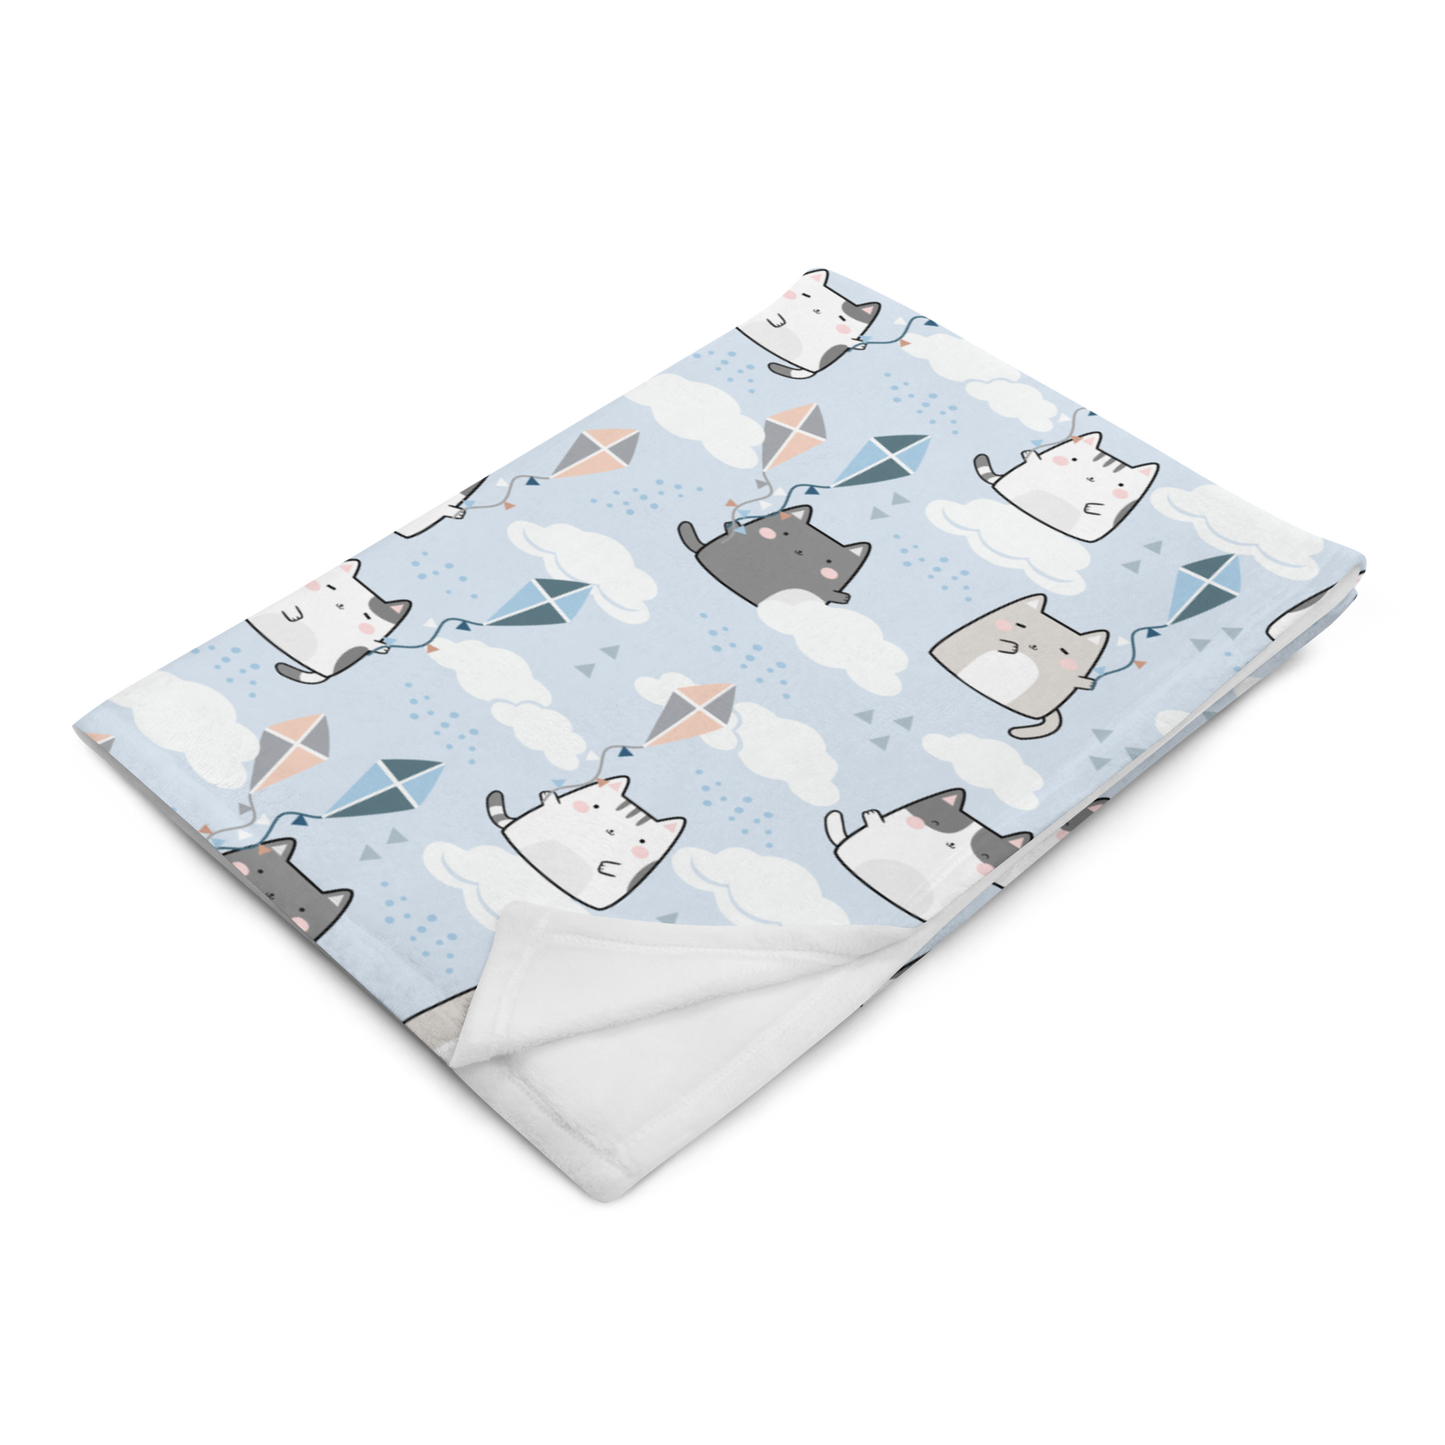 Throw Blanket | Cute Cat Themed with Light Blue Background